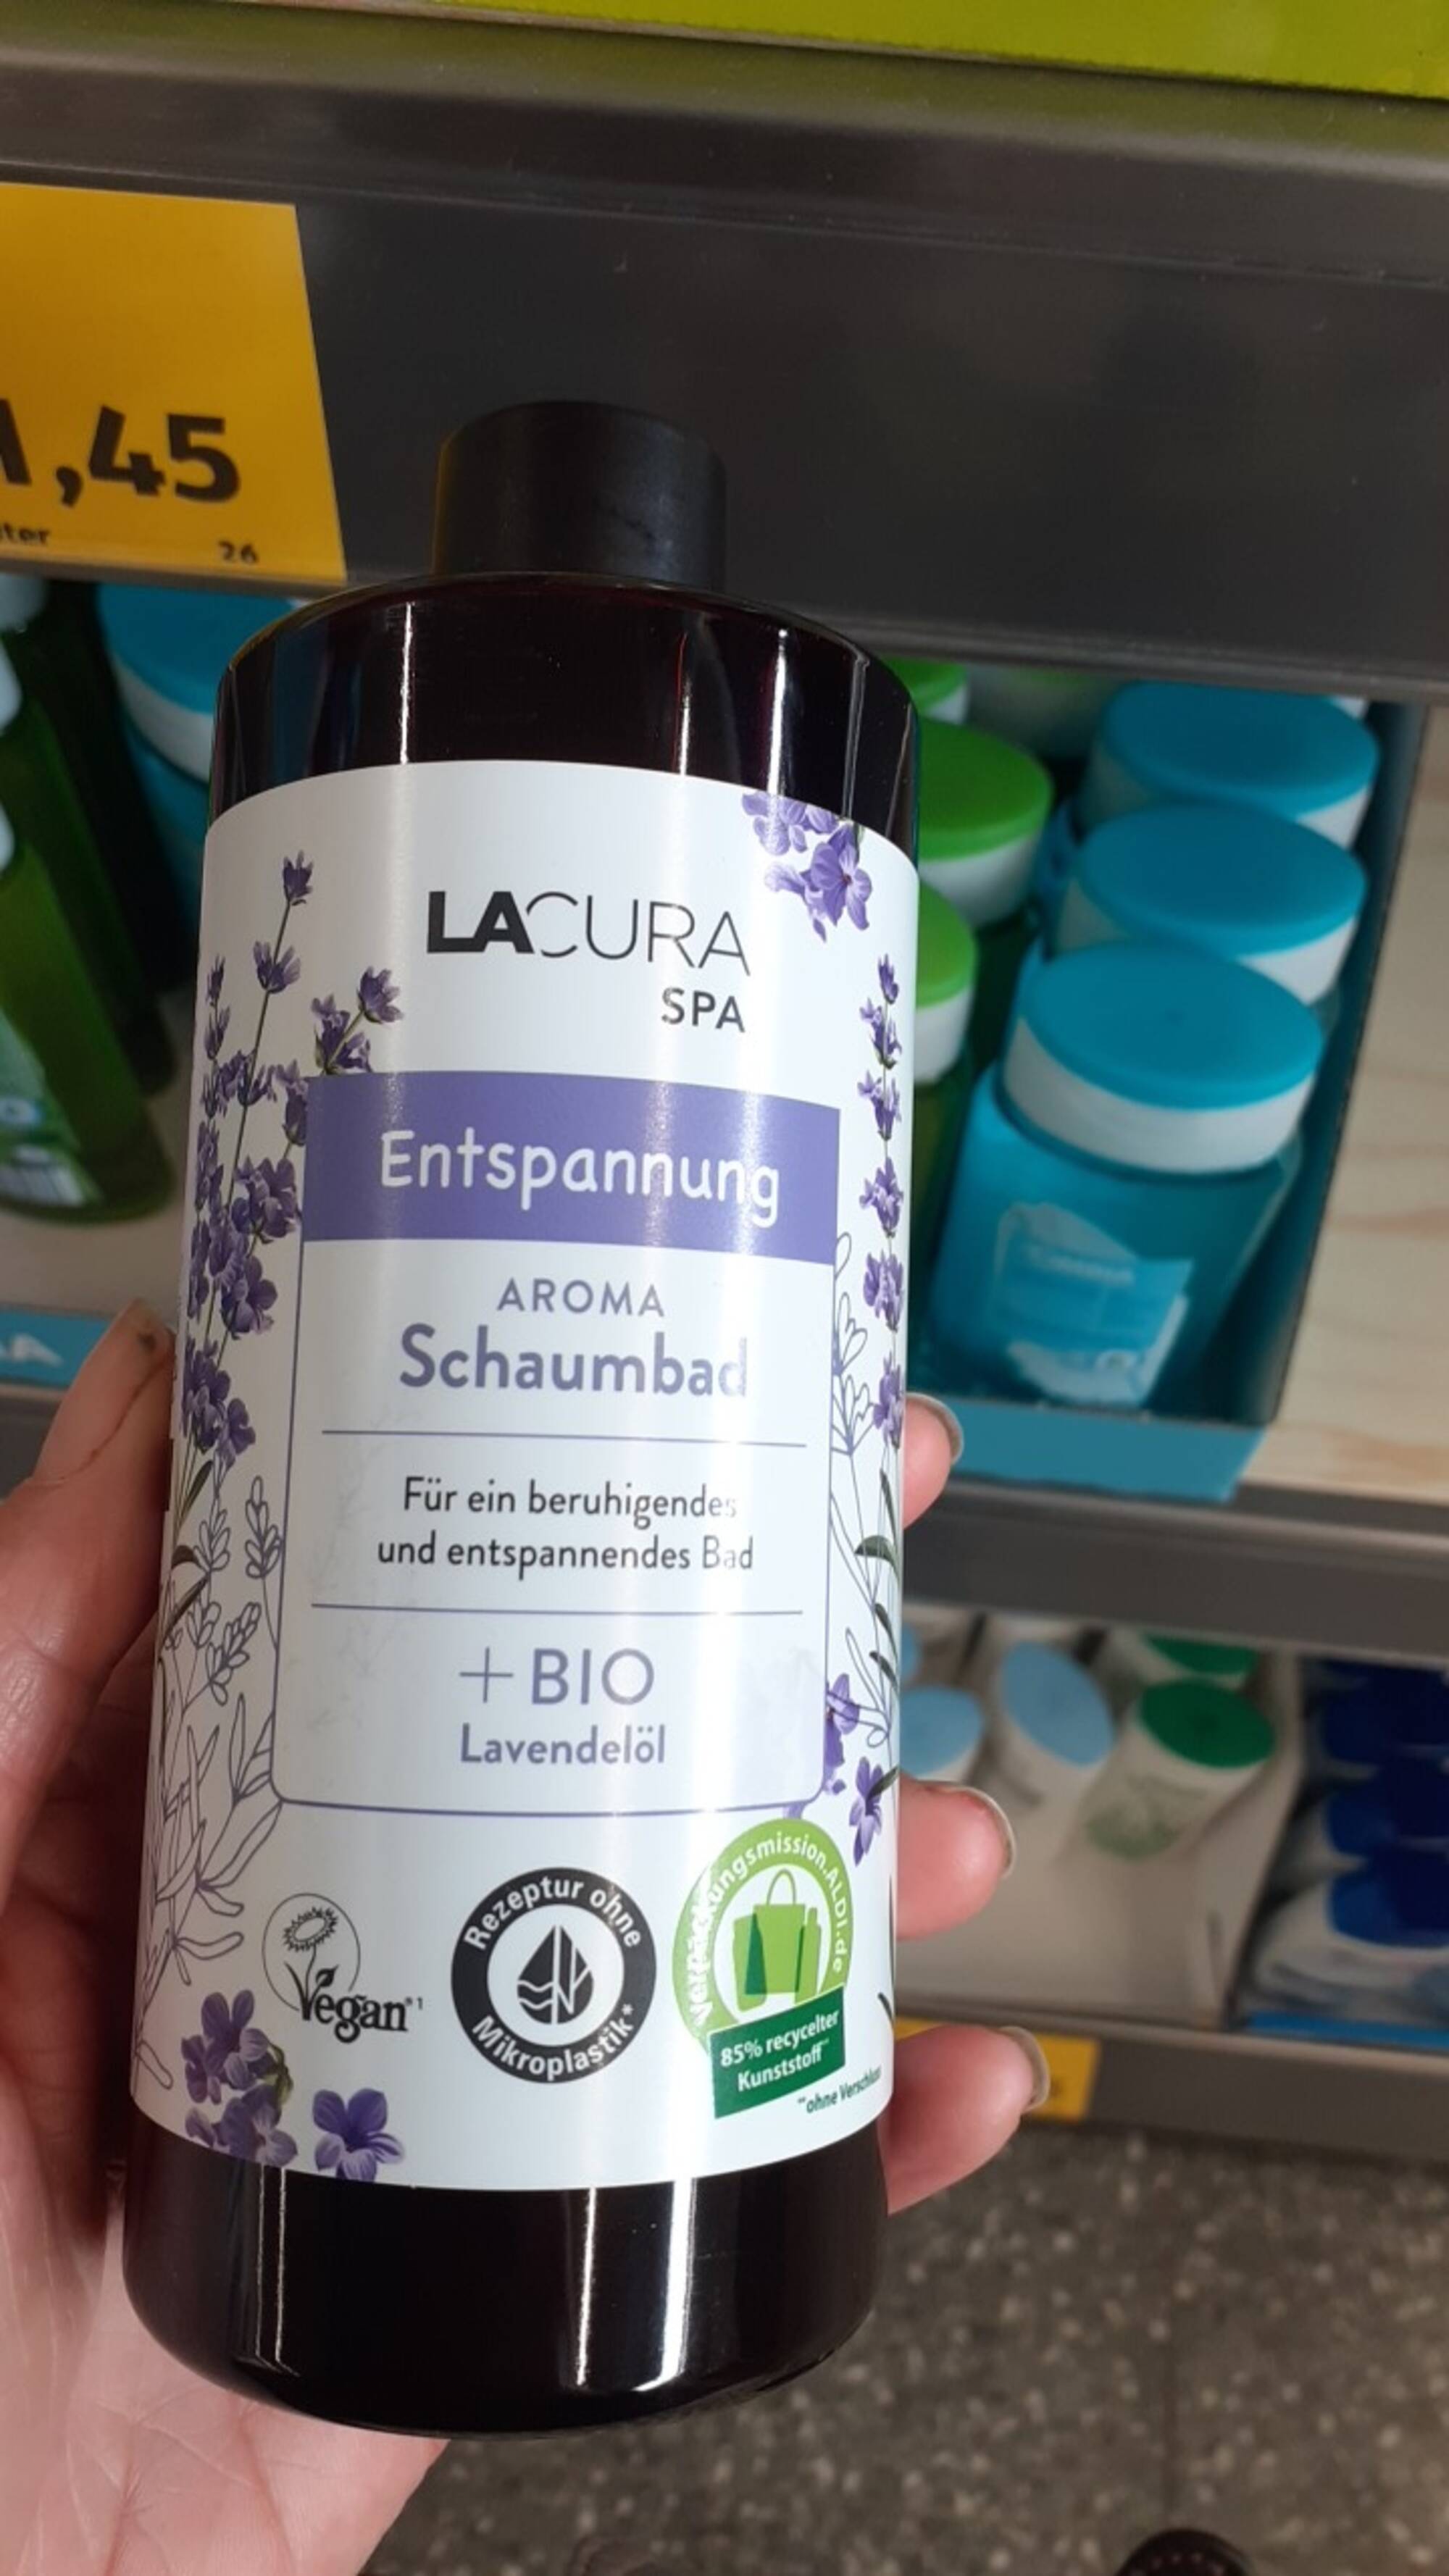 LACURA - Entspannung - Aroma schaumbad 